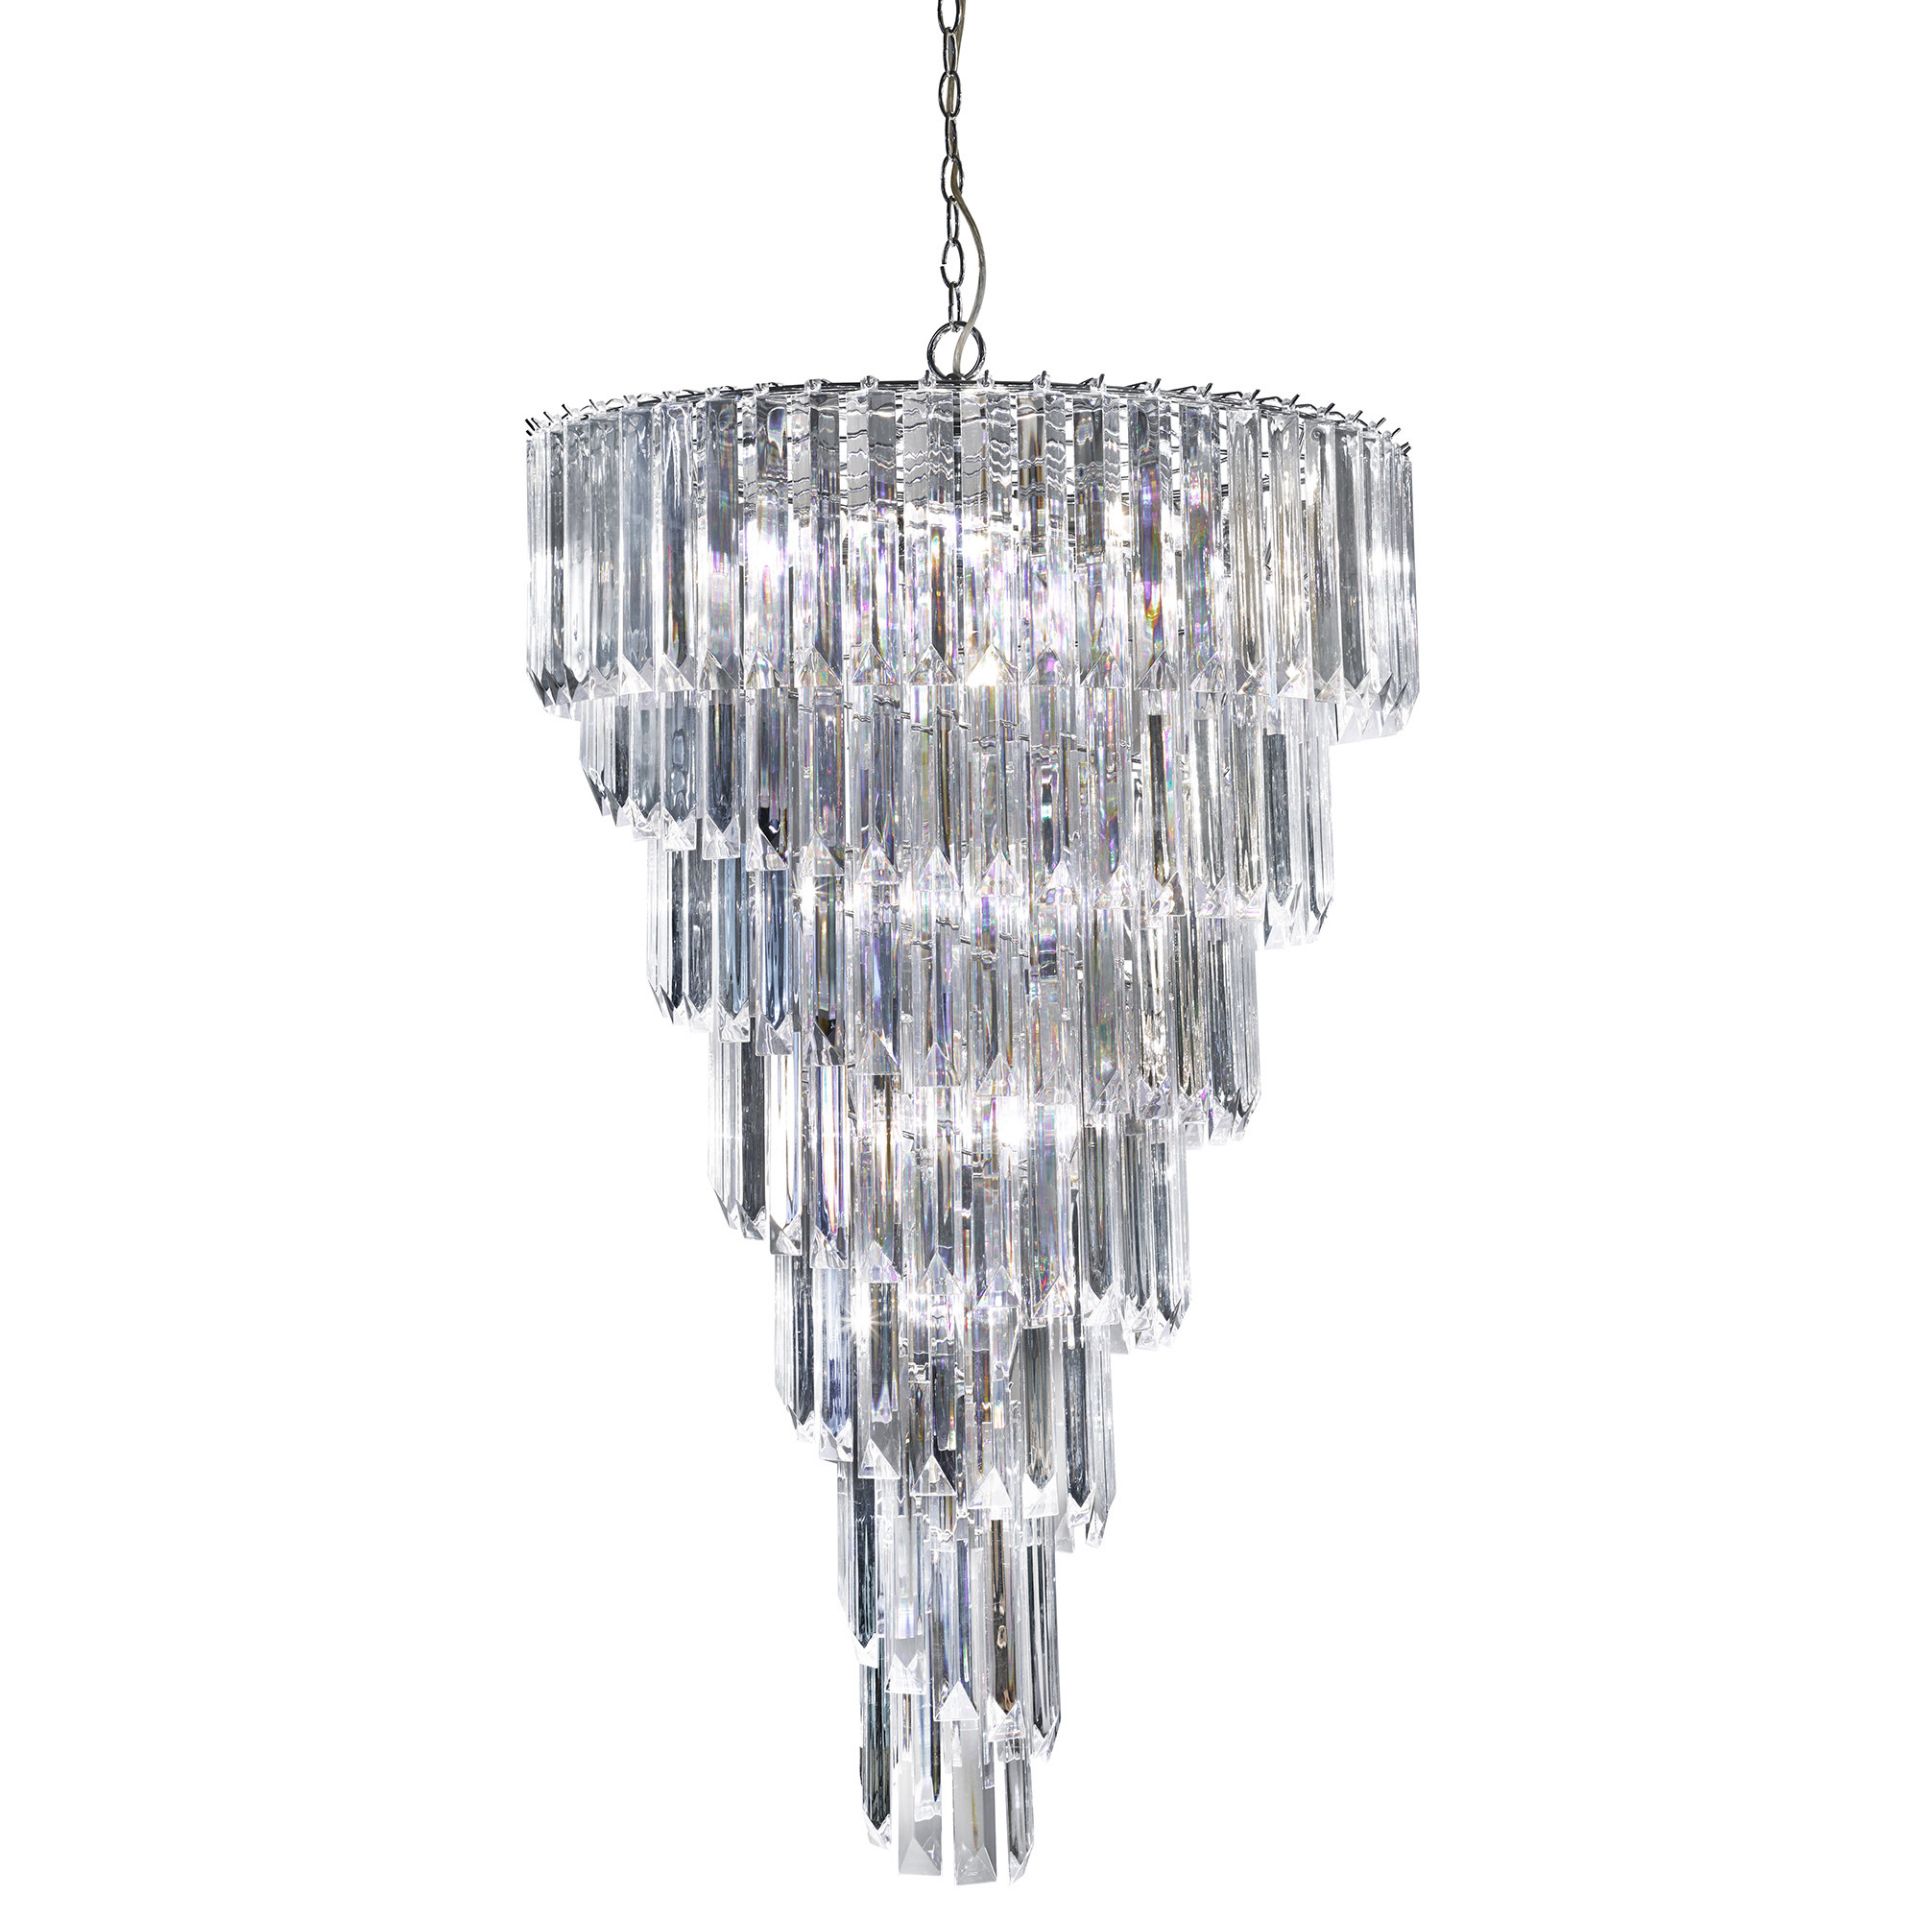 1 x Sigma Chrome 9 Light Chandelier With Clear Acrylic Prisms  - Striking Vintage Elegance in Chrome - Image 3 of 3